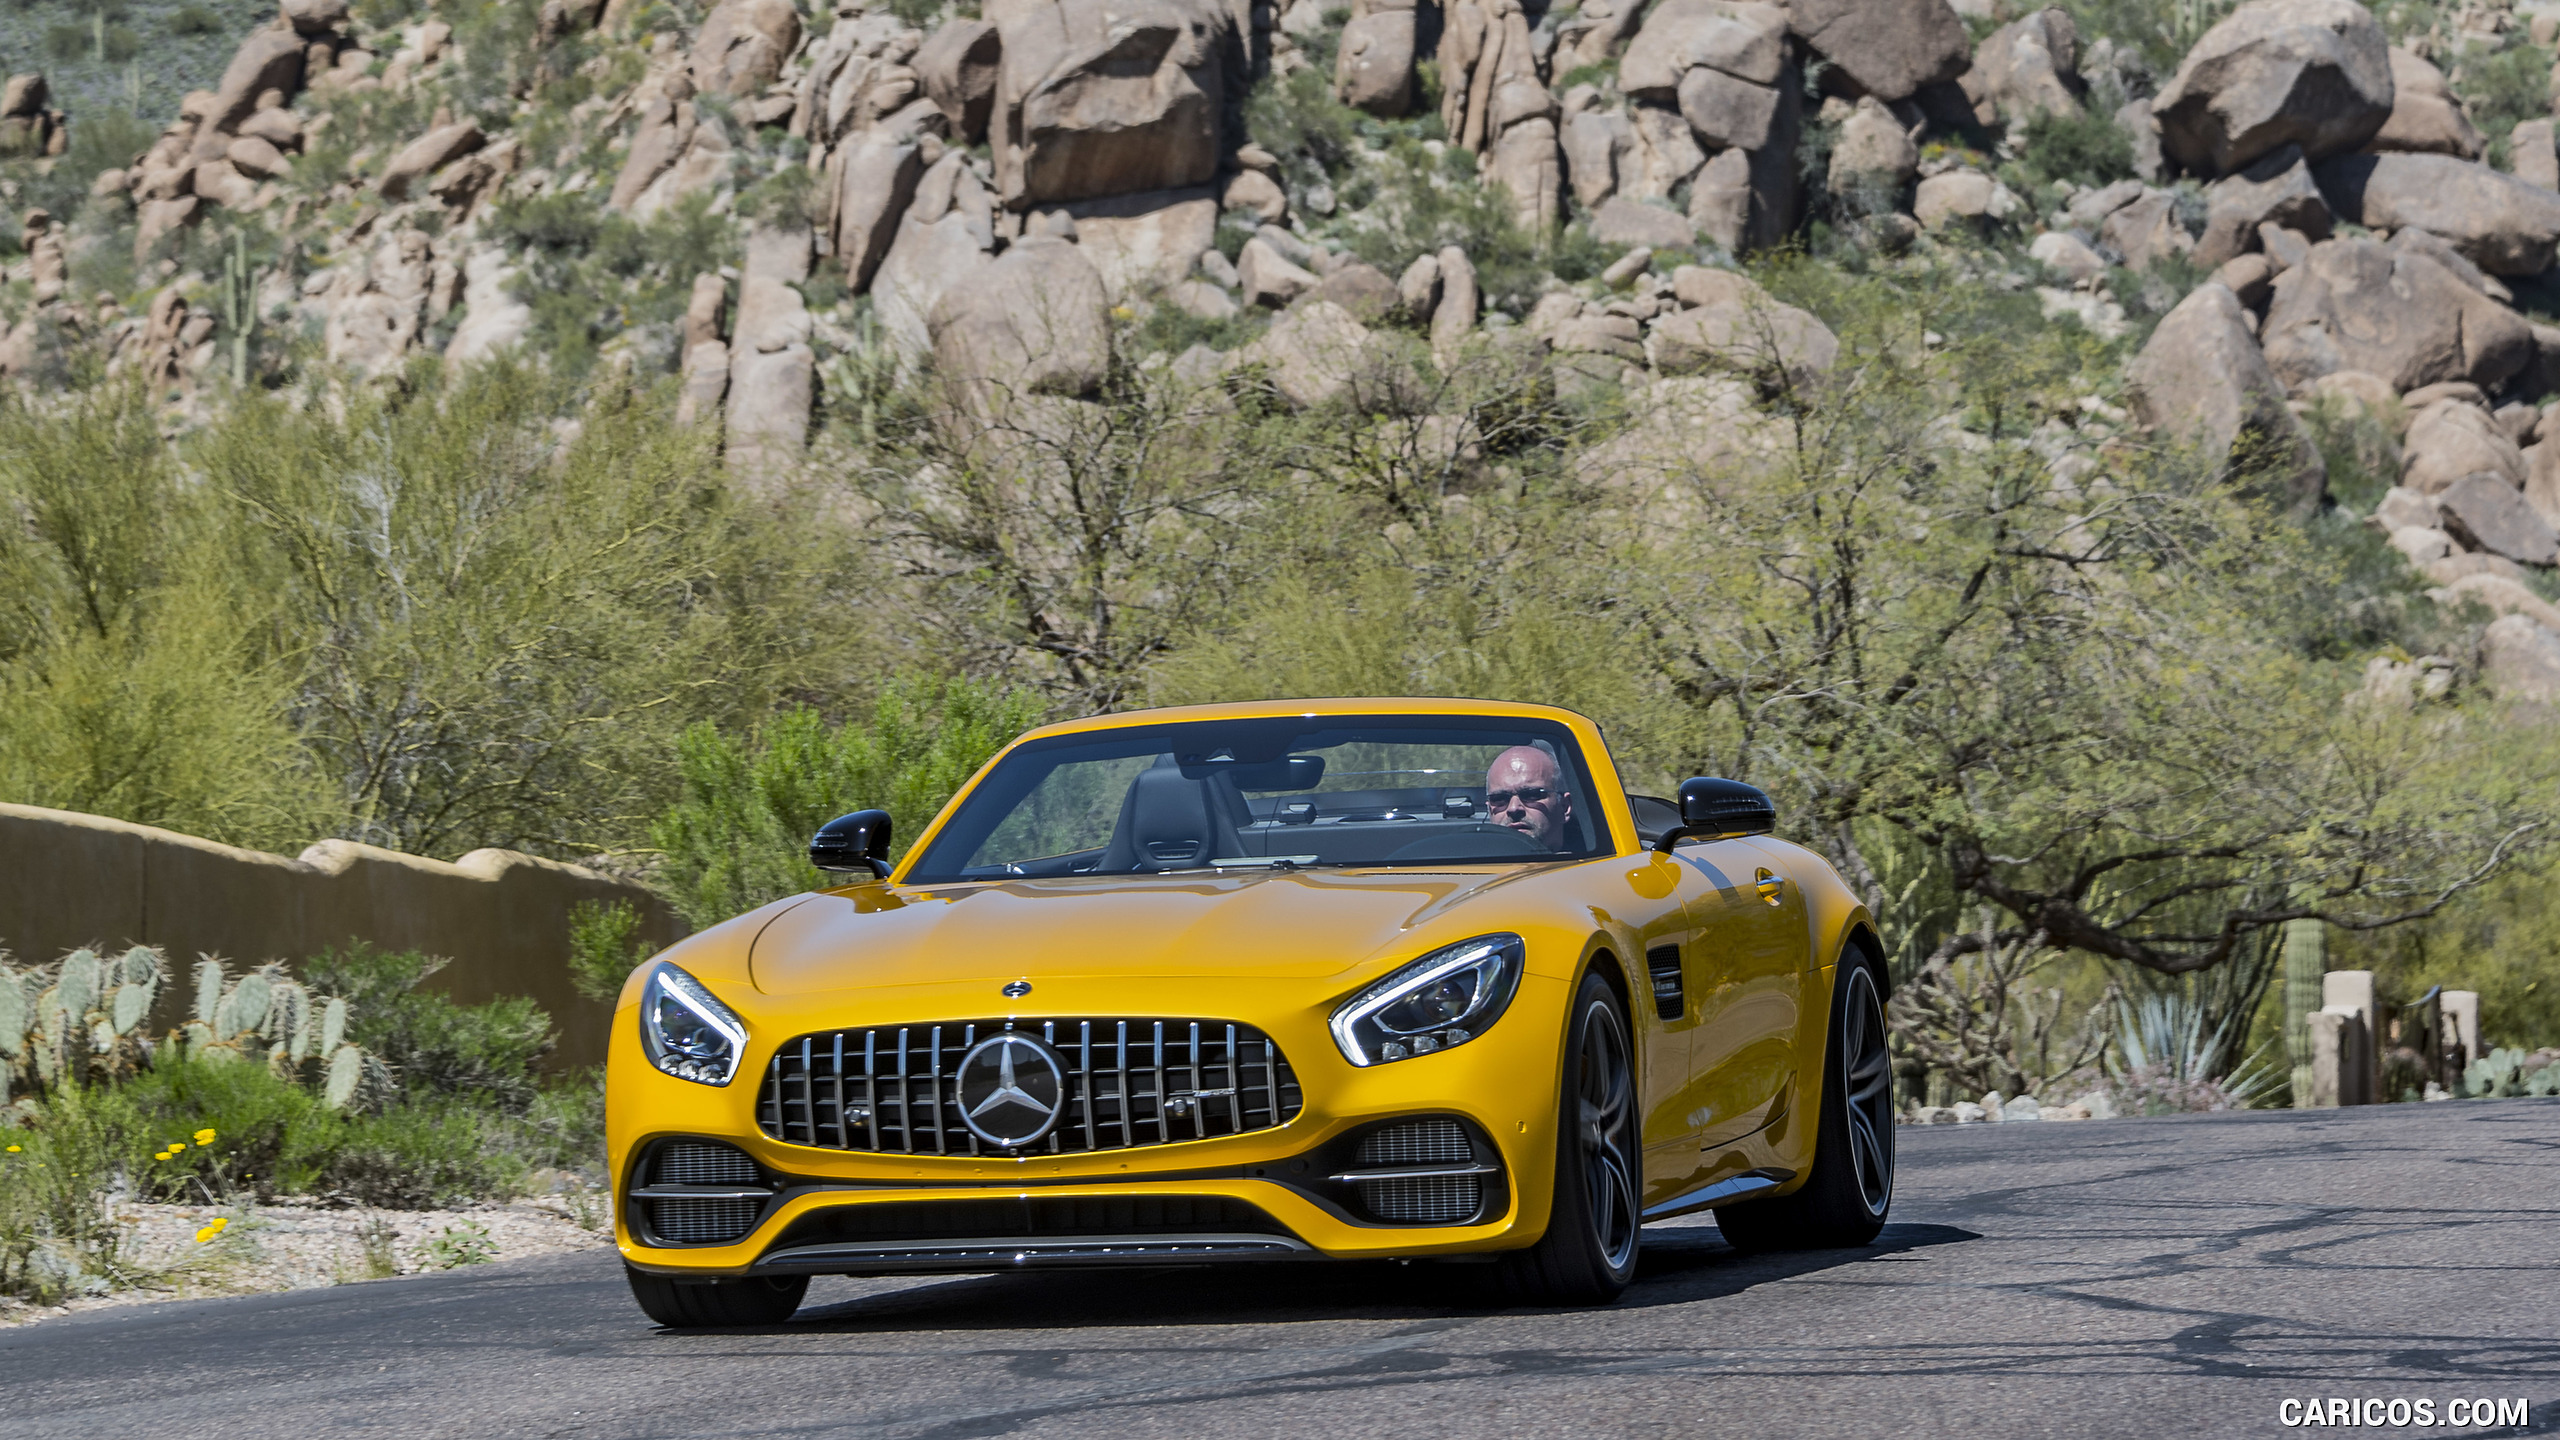 2018 Mercedes-AMG GT C Roadster - Front, #239 of 350